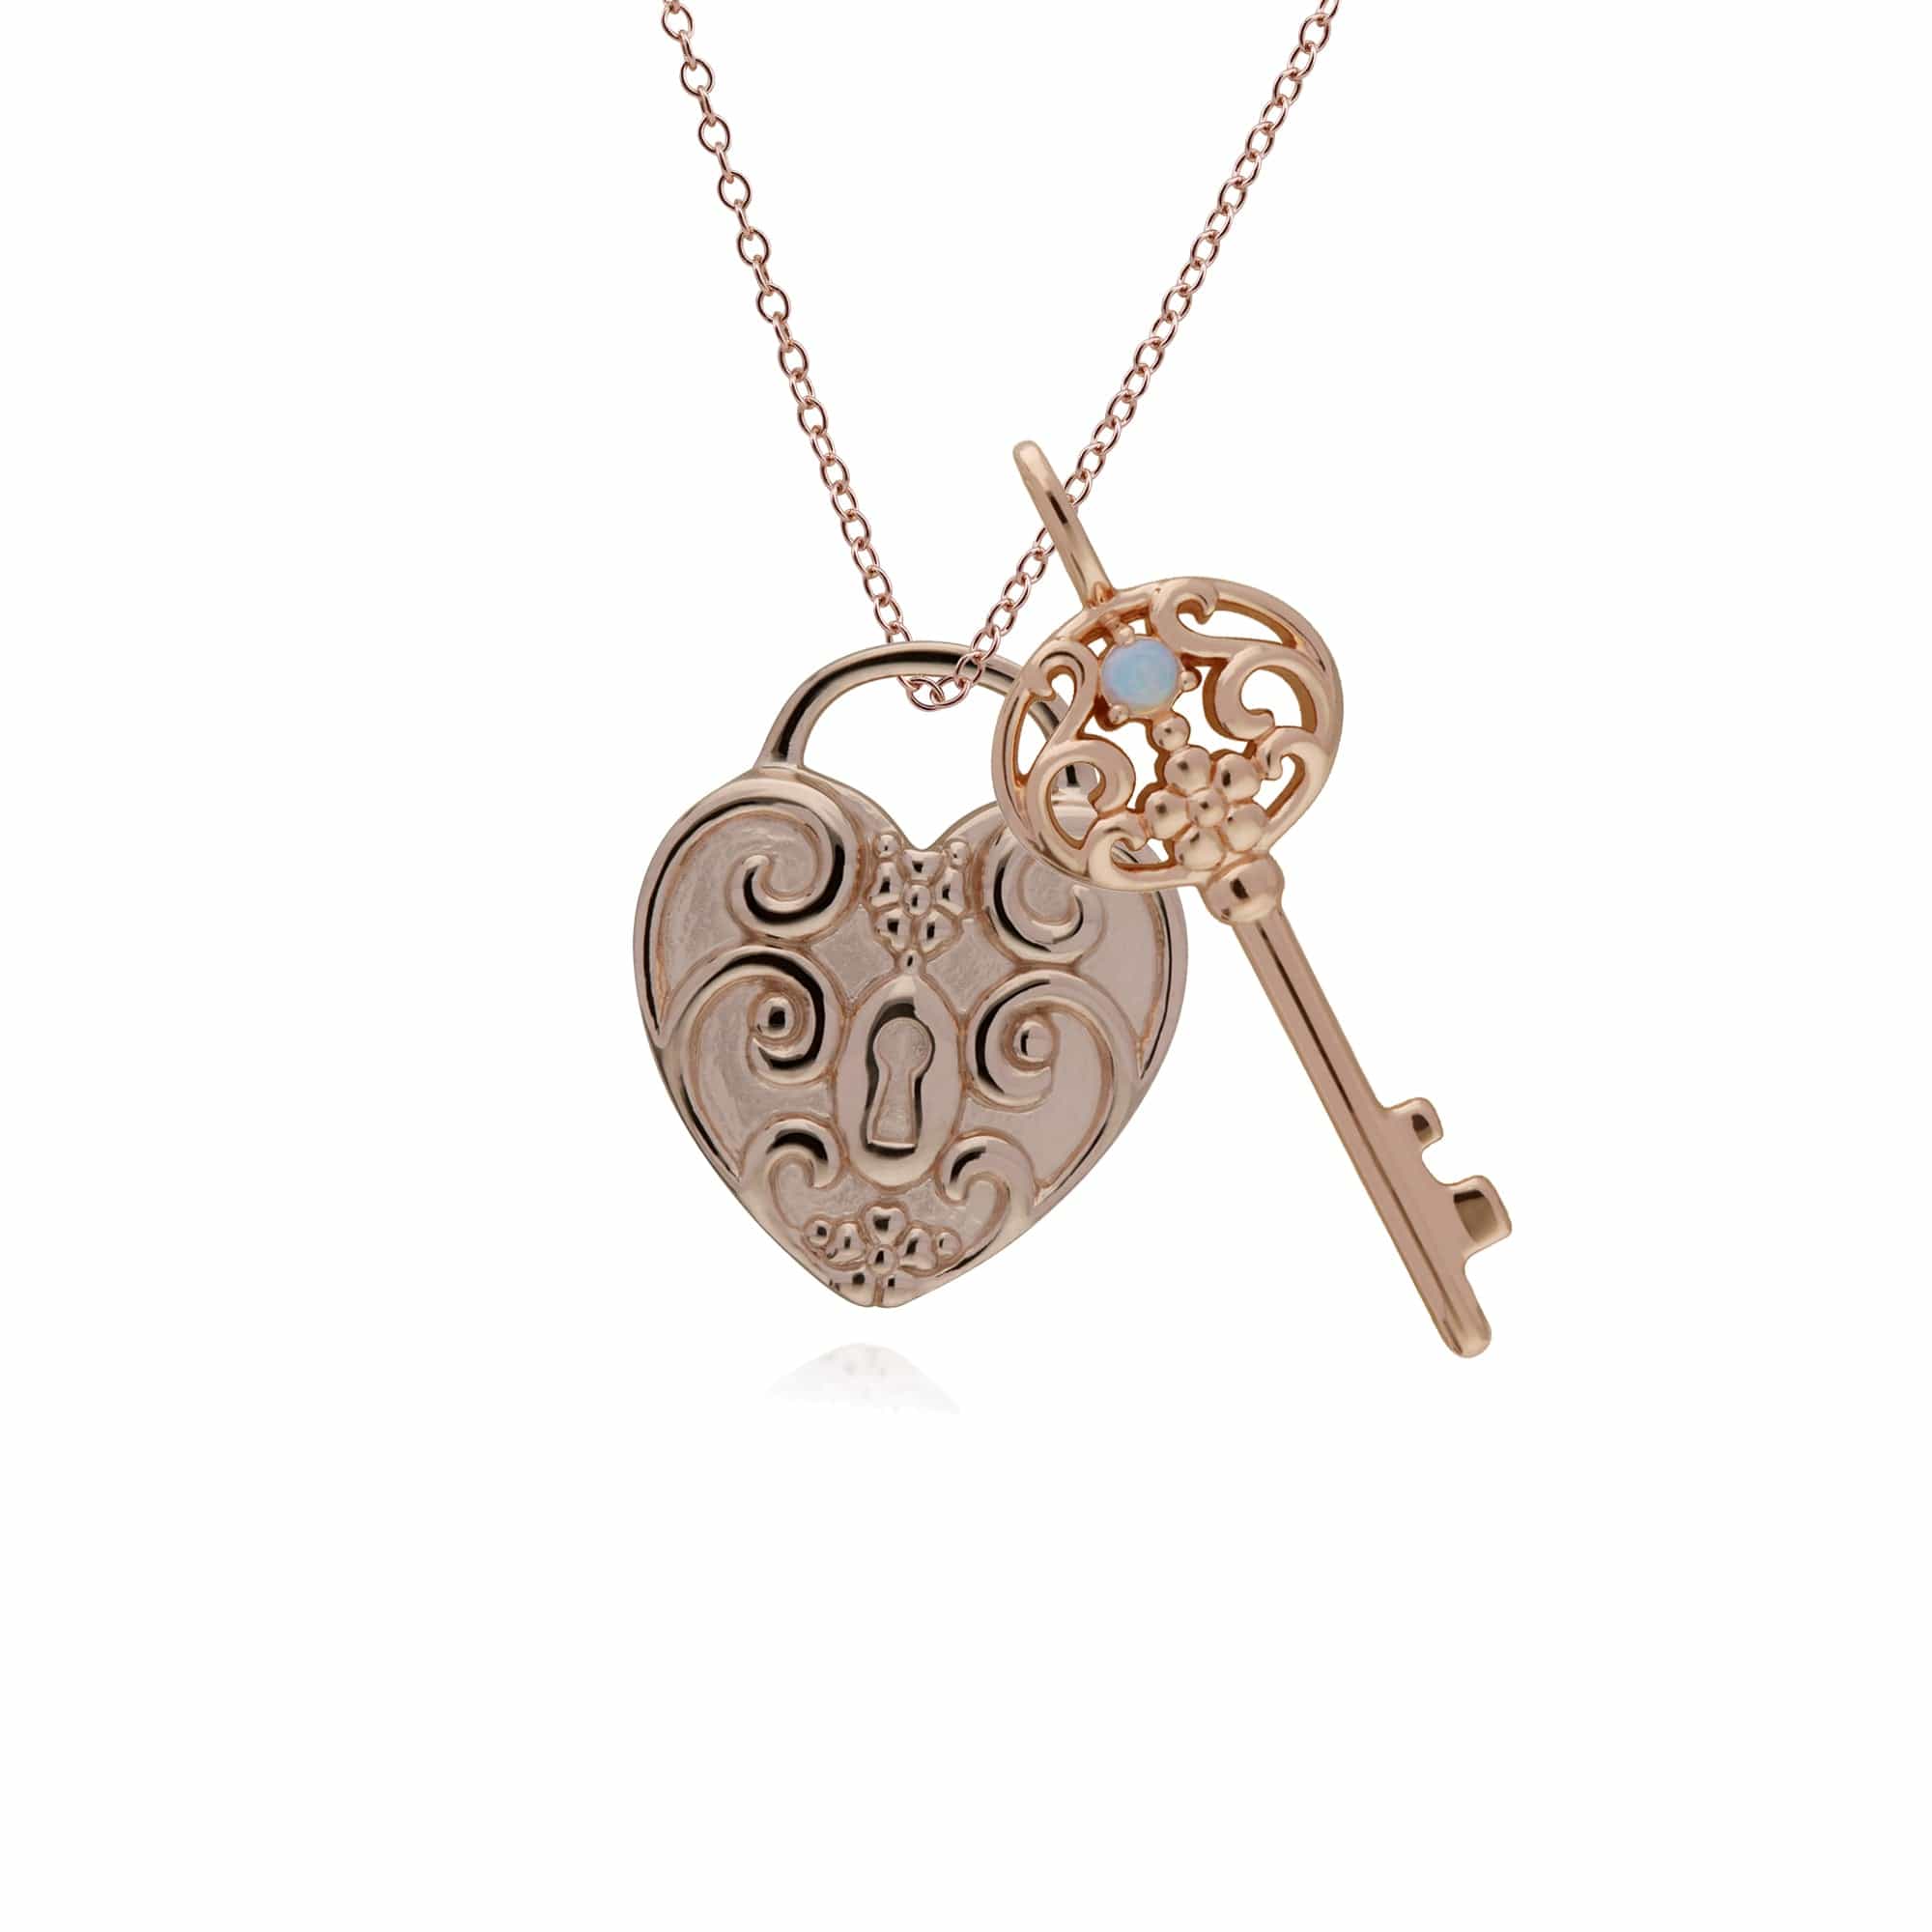 270P026702925-270P026501925 Classic Swirl Heart Lock Pendant & Opal Big Key Charm in Rose Gold Plated 925 Sterling Silver 1